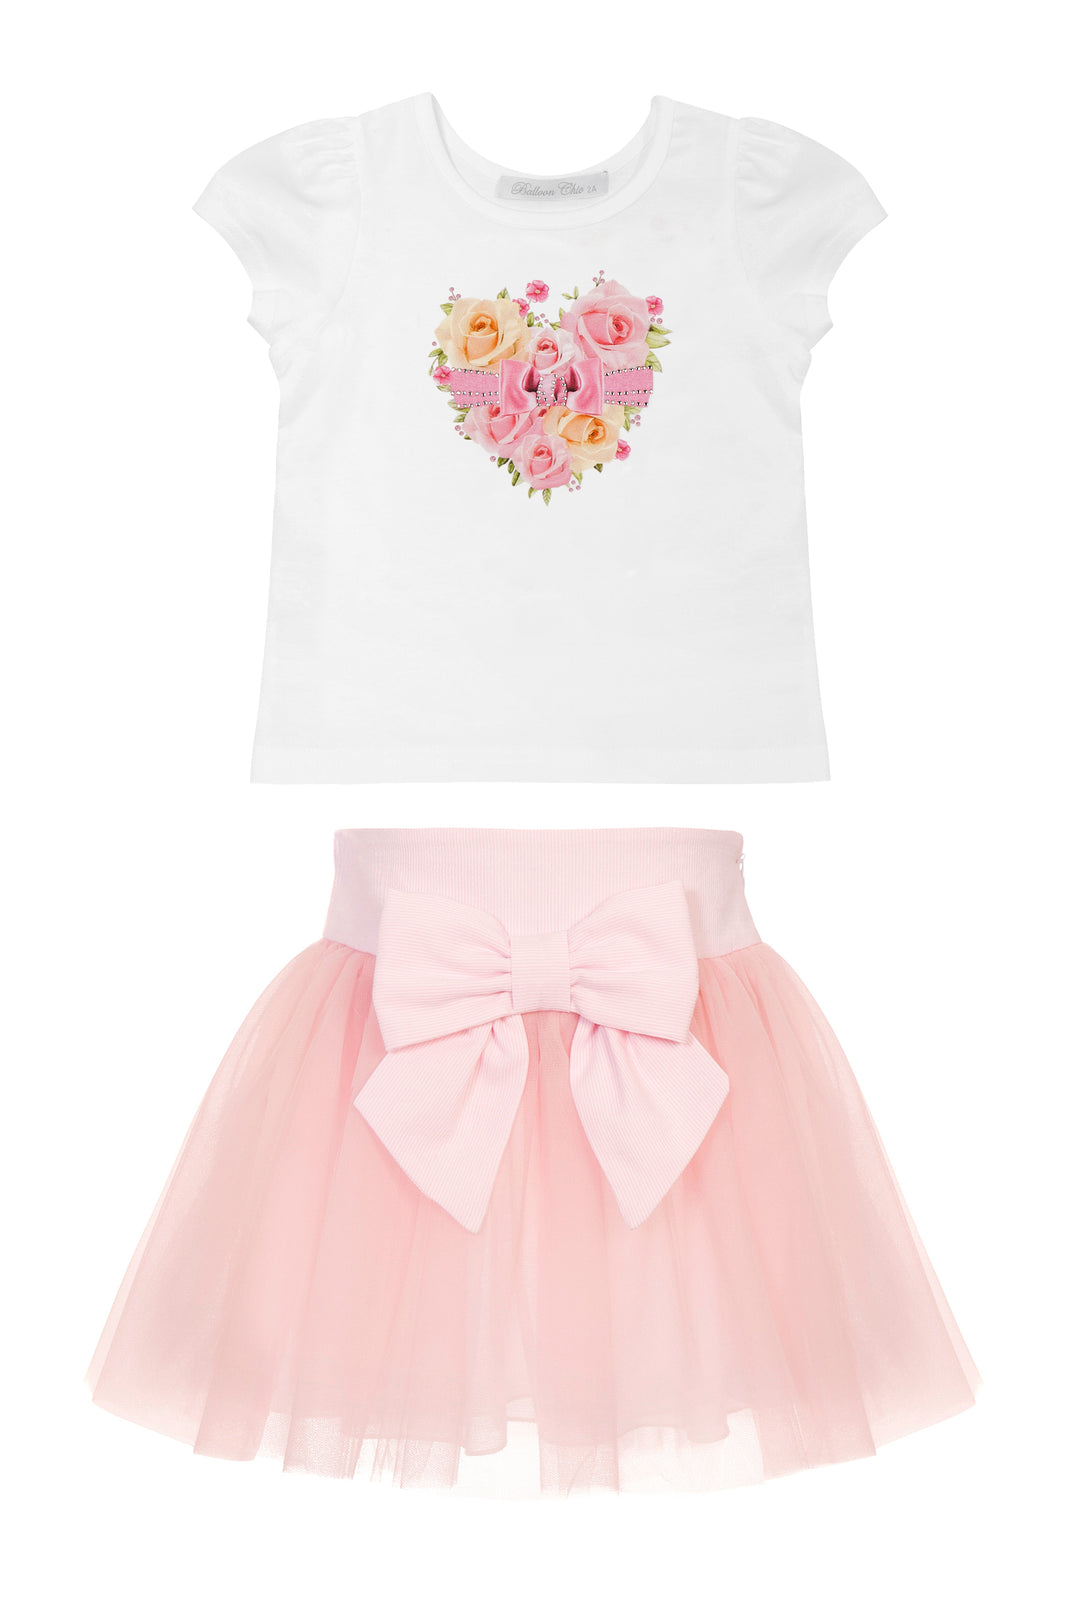 Balloon Chic "Dixie" White Floral Top & Pink Tulle Skirt | Millie and John